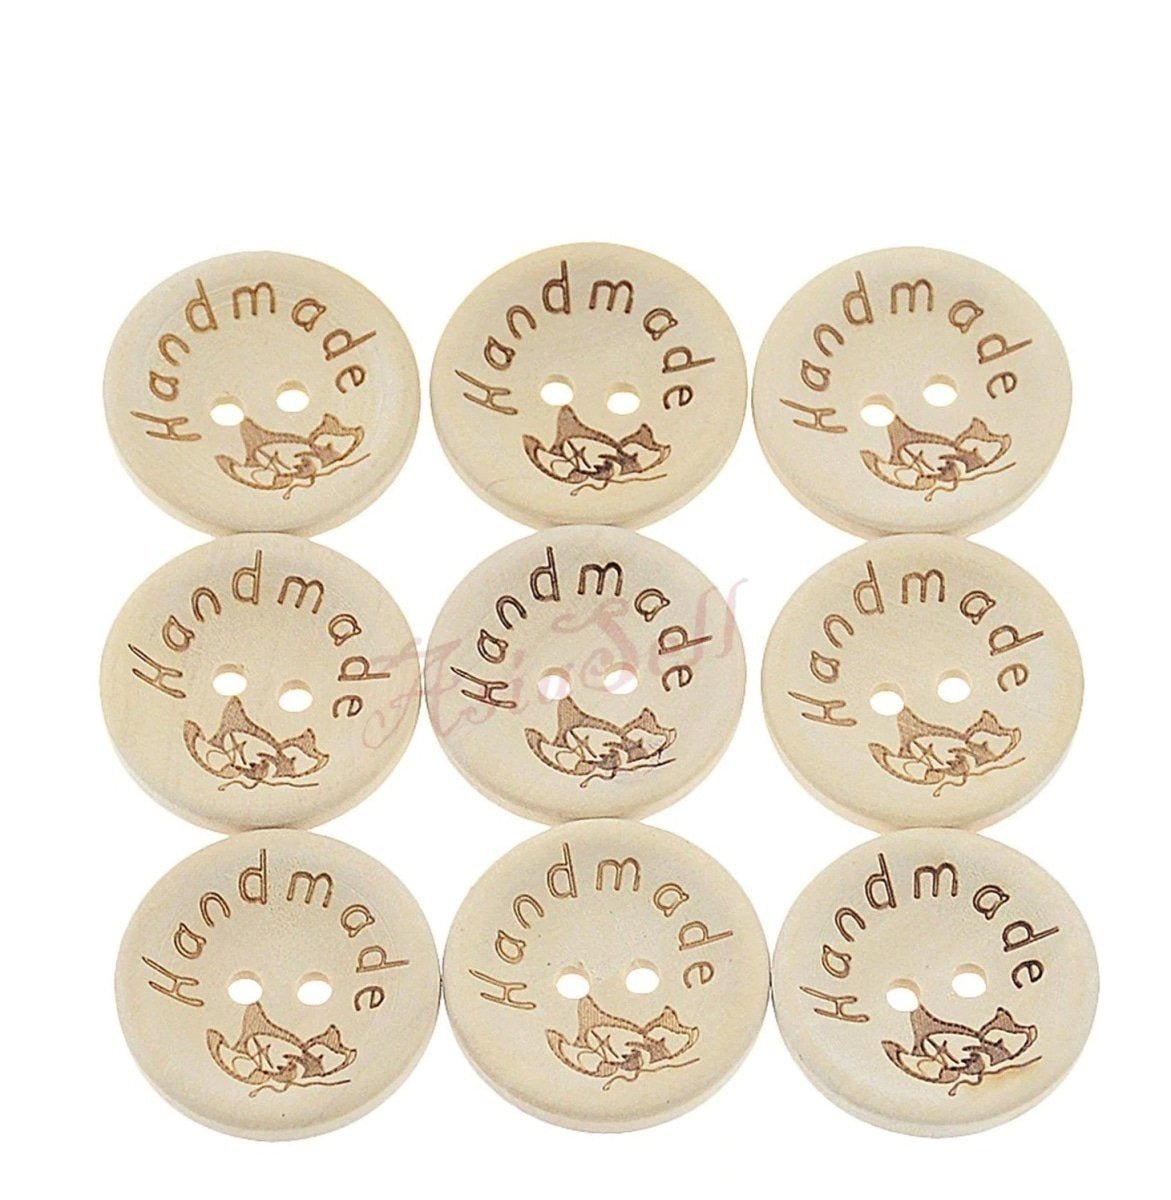 100pcs 2-Holes Handmade with Love Round Wooden Buttons Button Handmade Clothes - 15mm Butterfly Design - - Asia Sell